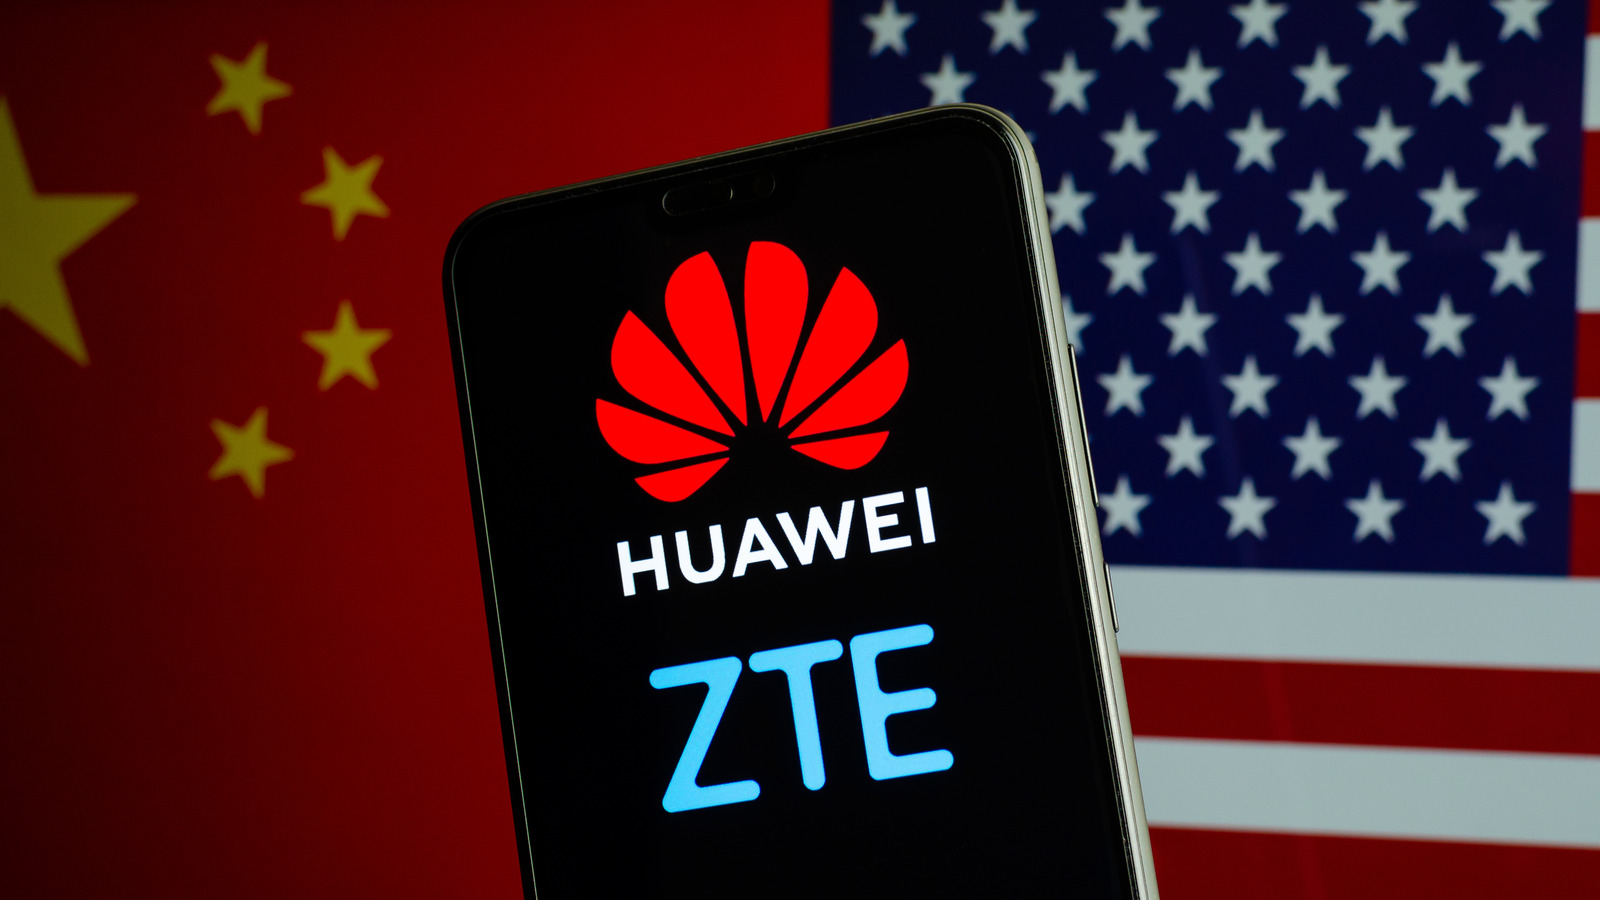 fcc-reportedly-gears-up-to-ban-sales-of-huawei-zte-hardware-slashgear